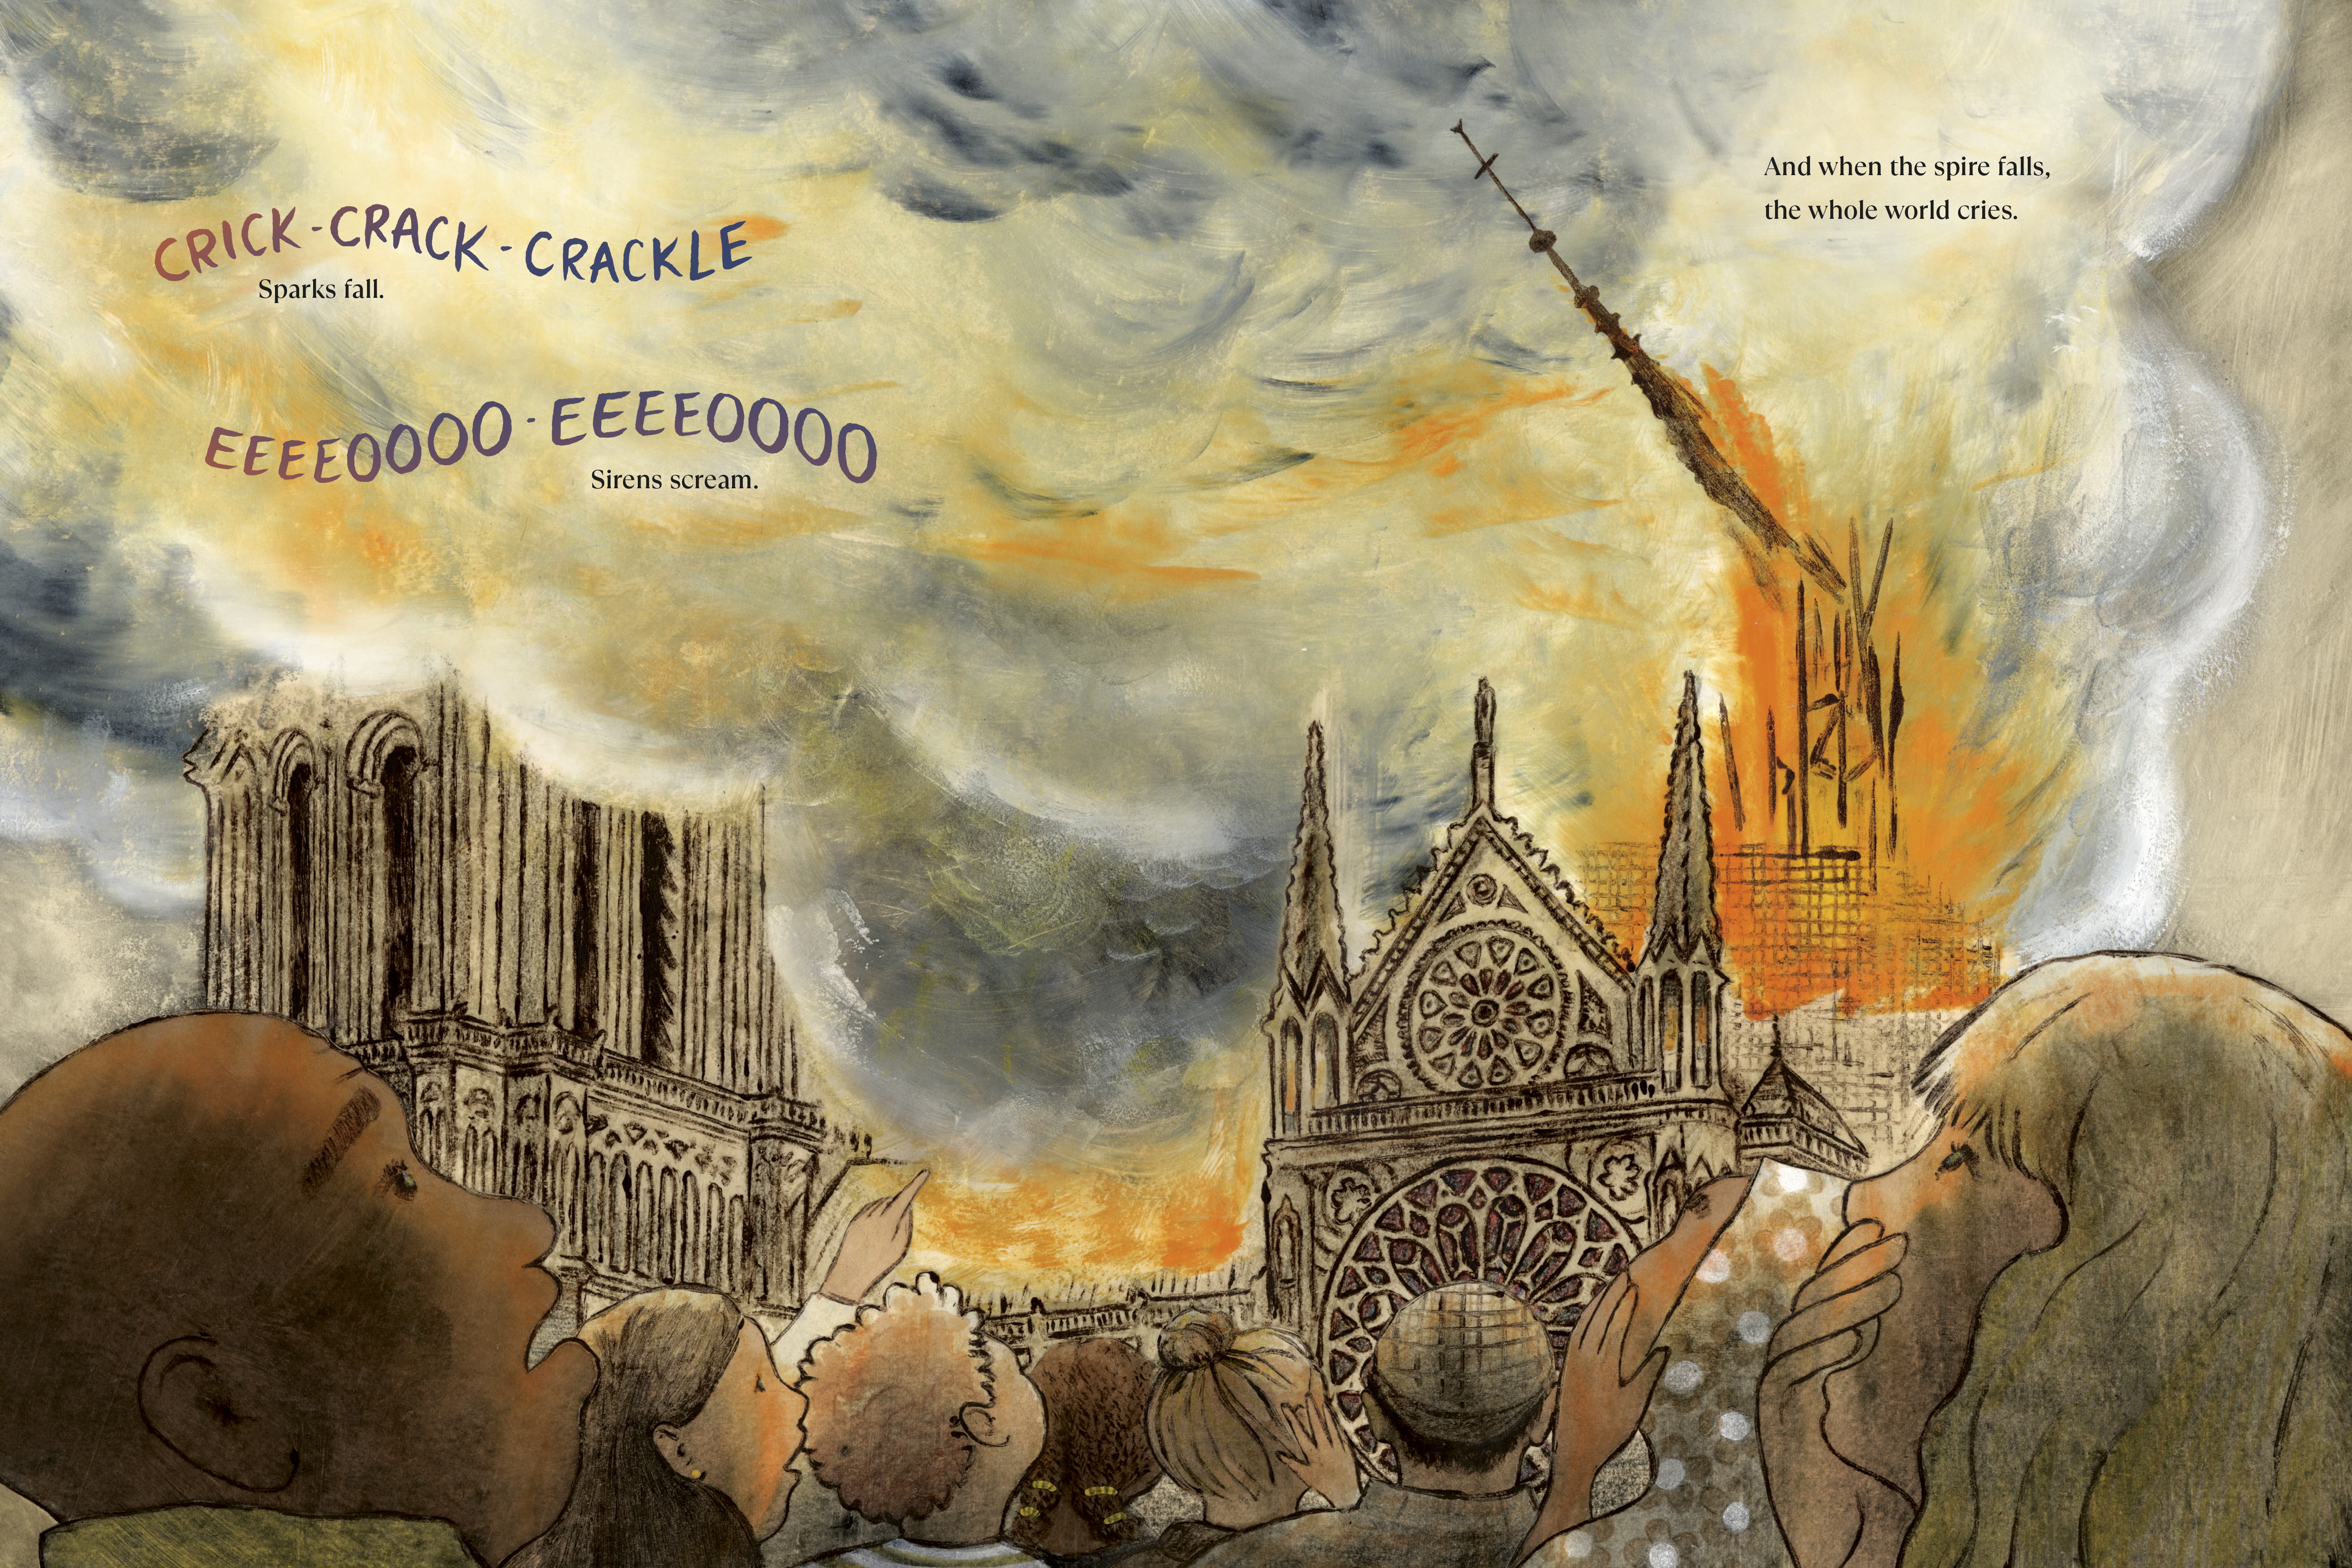 In this interior image from The Bees of Notre Dame, a distressed, diverse crowd  watches as the roof of Notre Dame burns in orange flames.